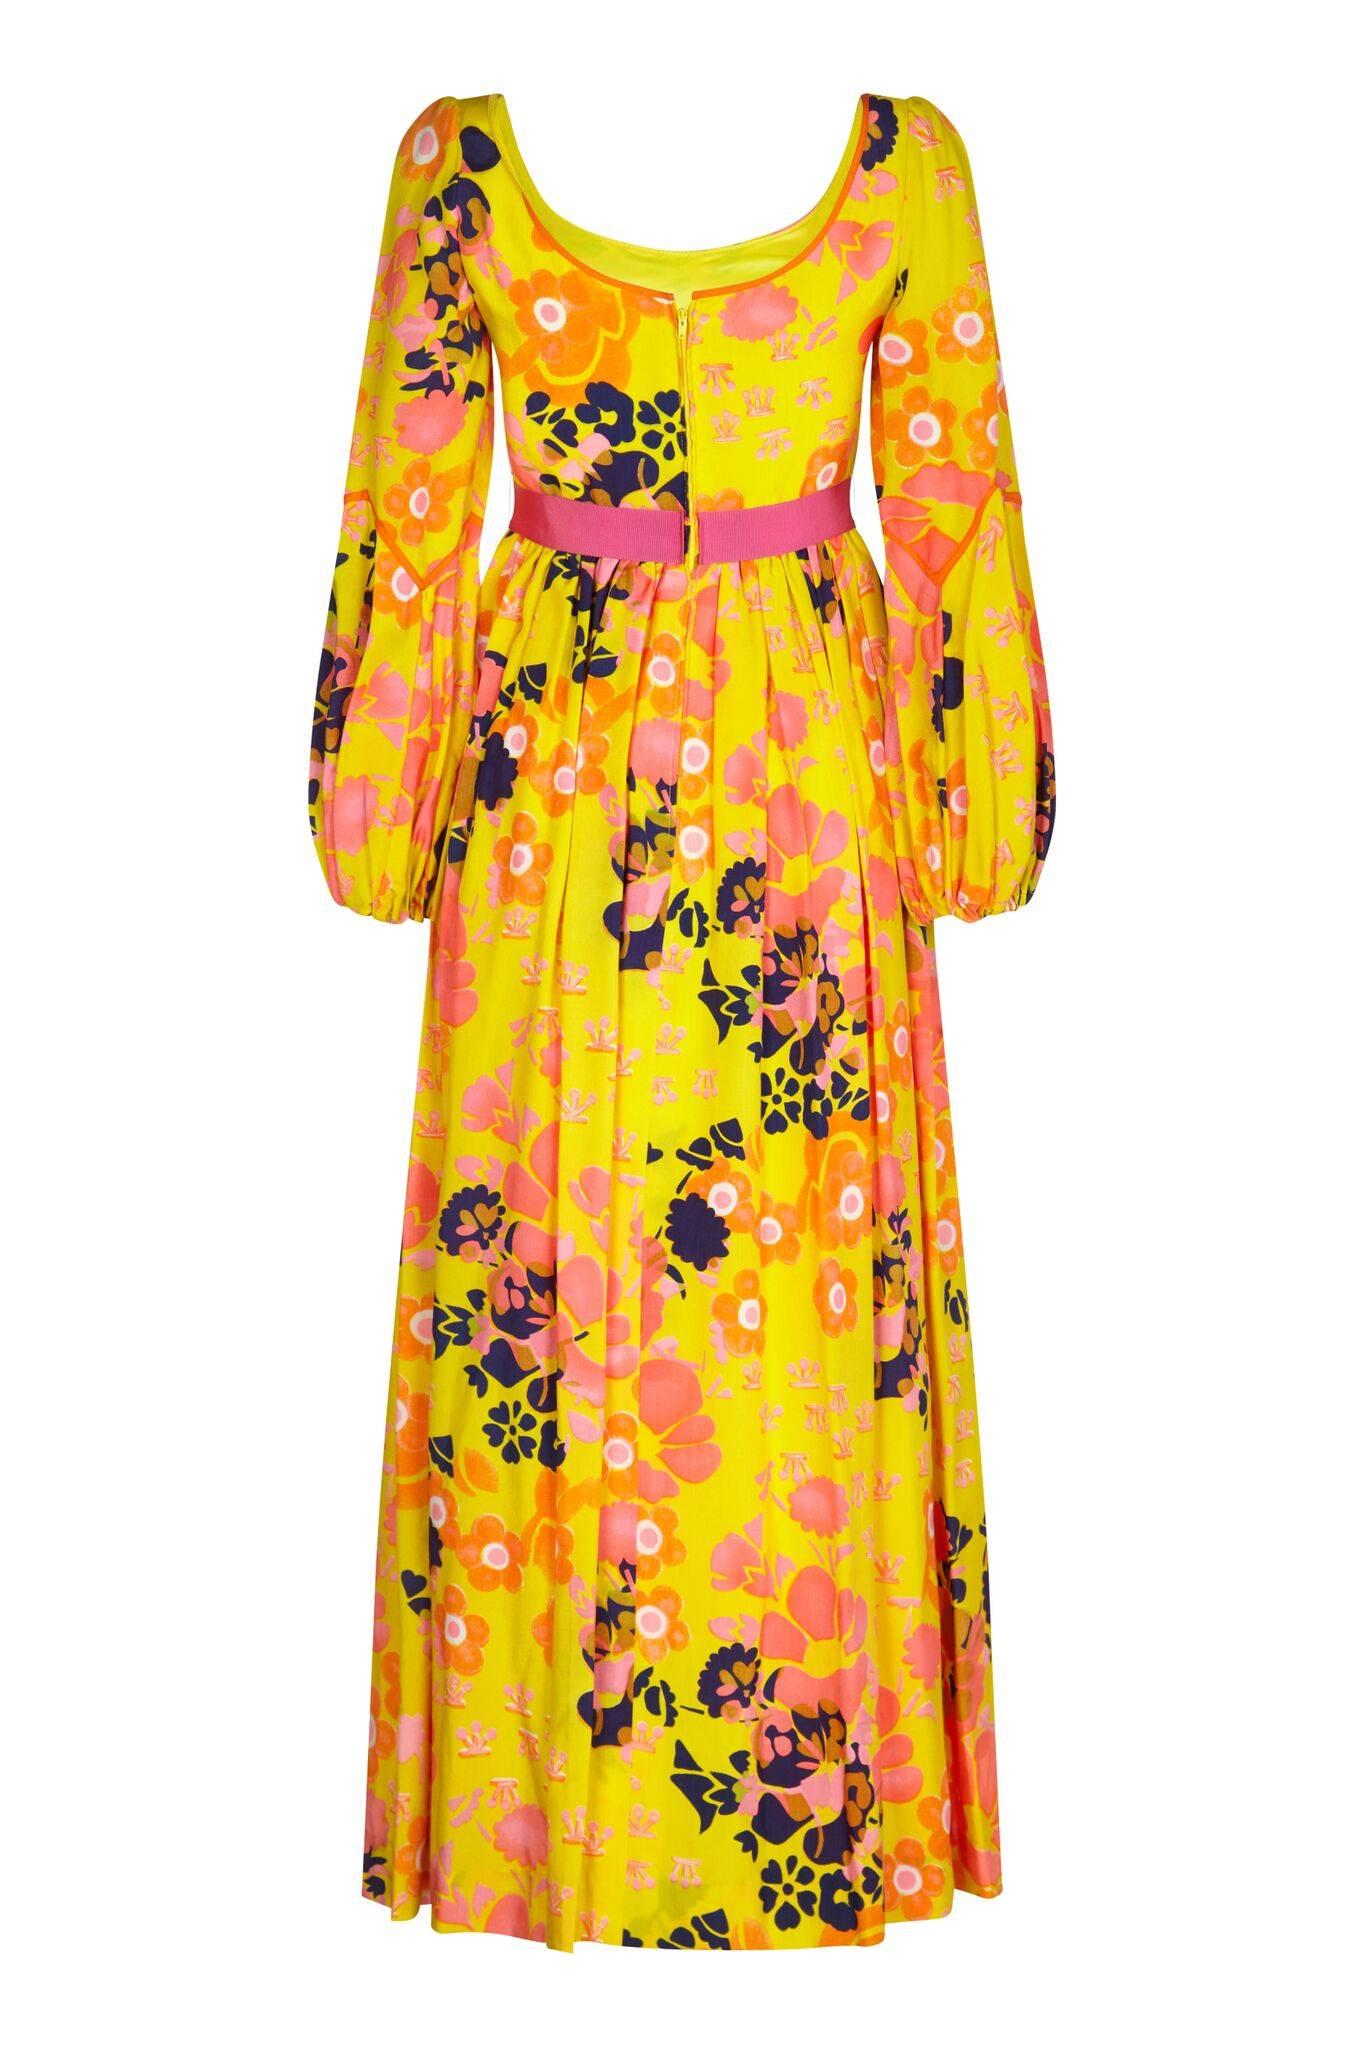 This statement Frank Usher 1960s psychedelic yellow floral print dress with pink ribbon detail is a beautifully constructed piece. The generous silk fee overlay is predominantly bright sunshine yellow with a striking psychedelic floral design in